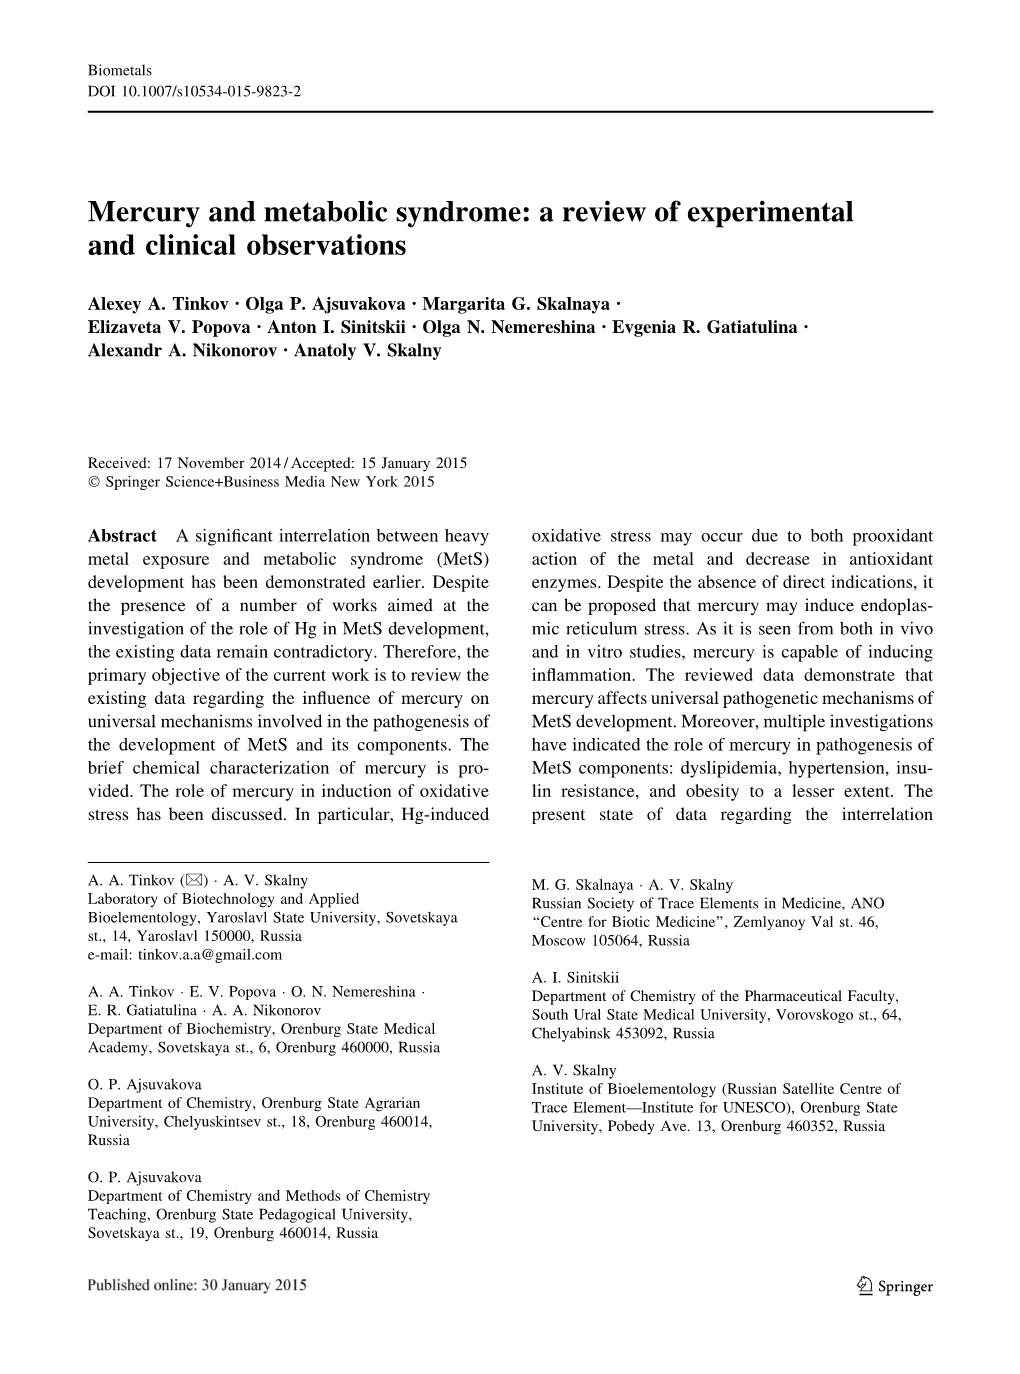 Mercury and Metabolic Syndrome: a Review of Experimental and Clinical Observations